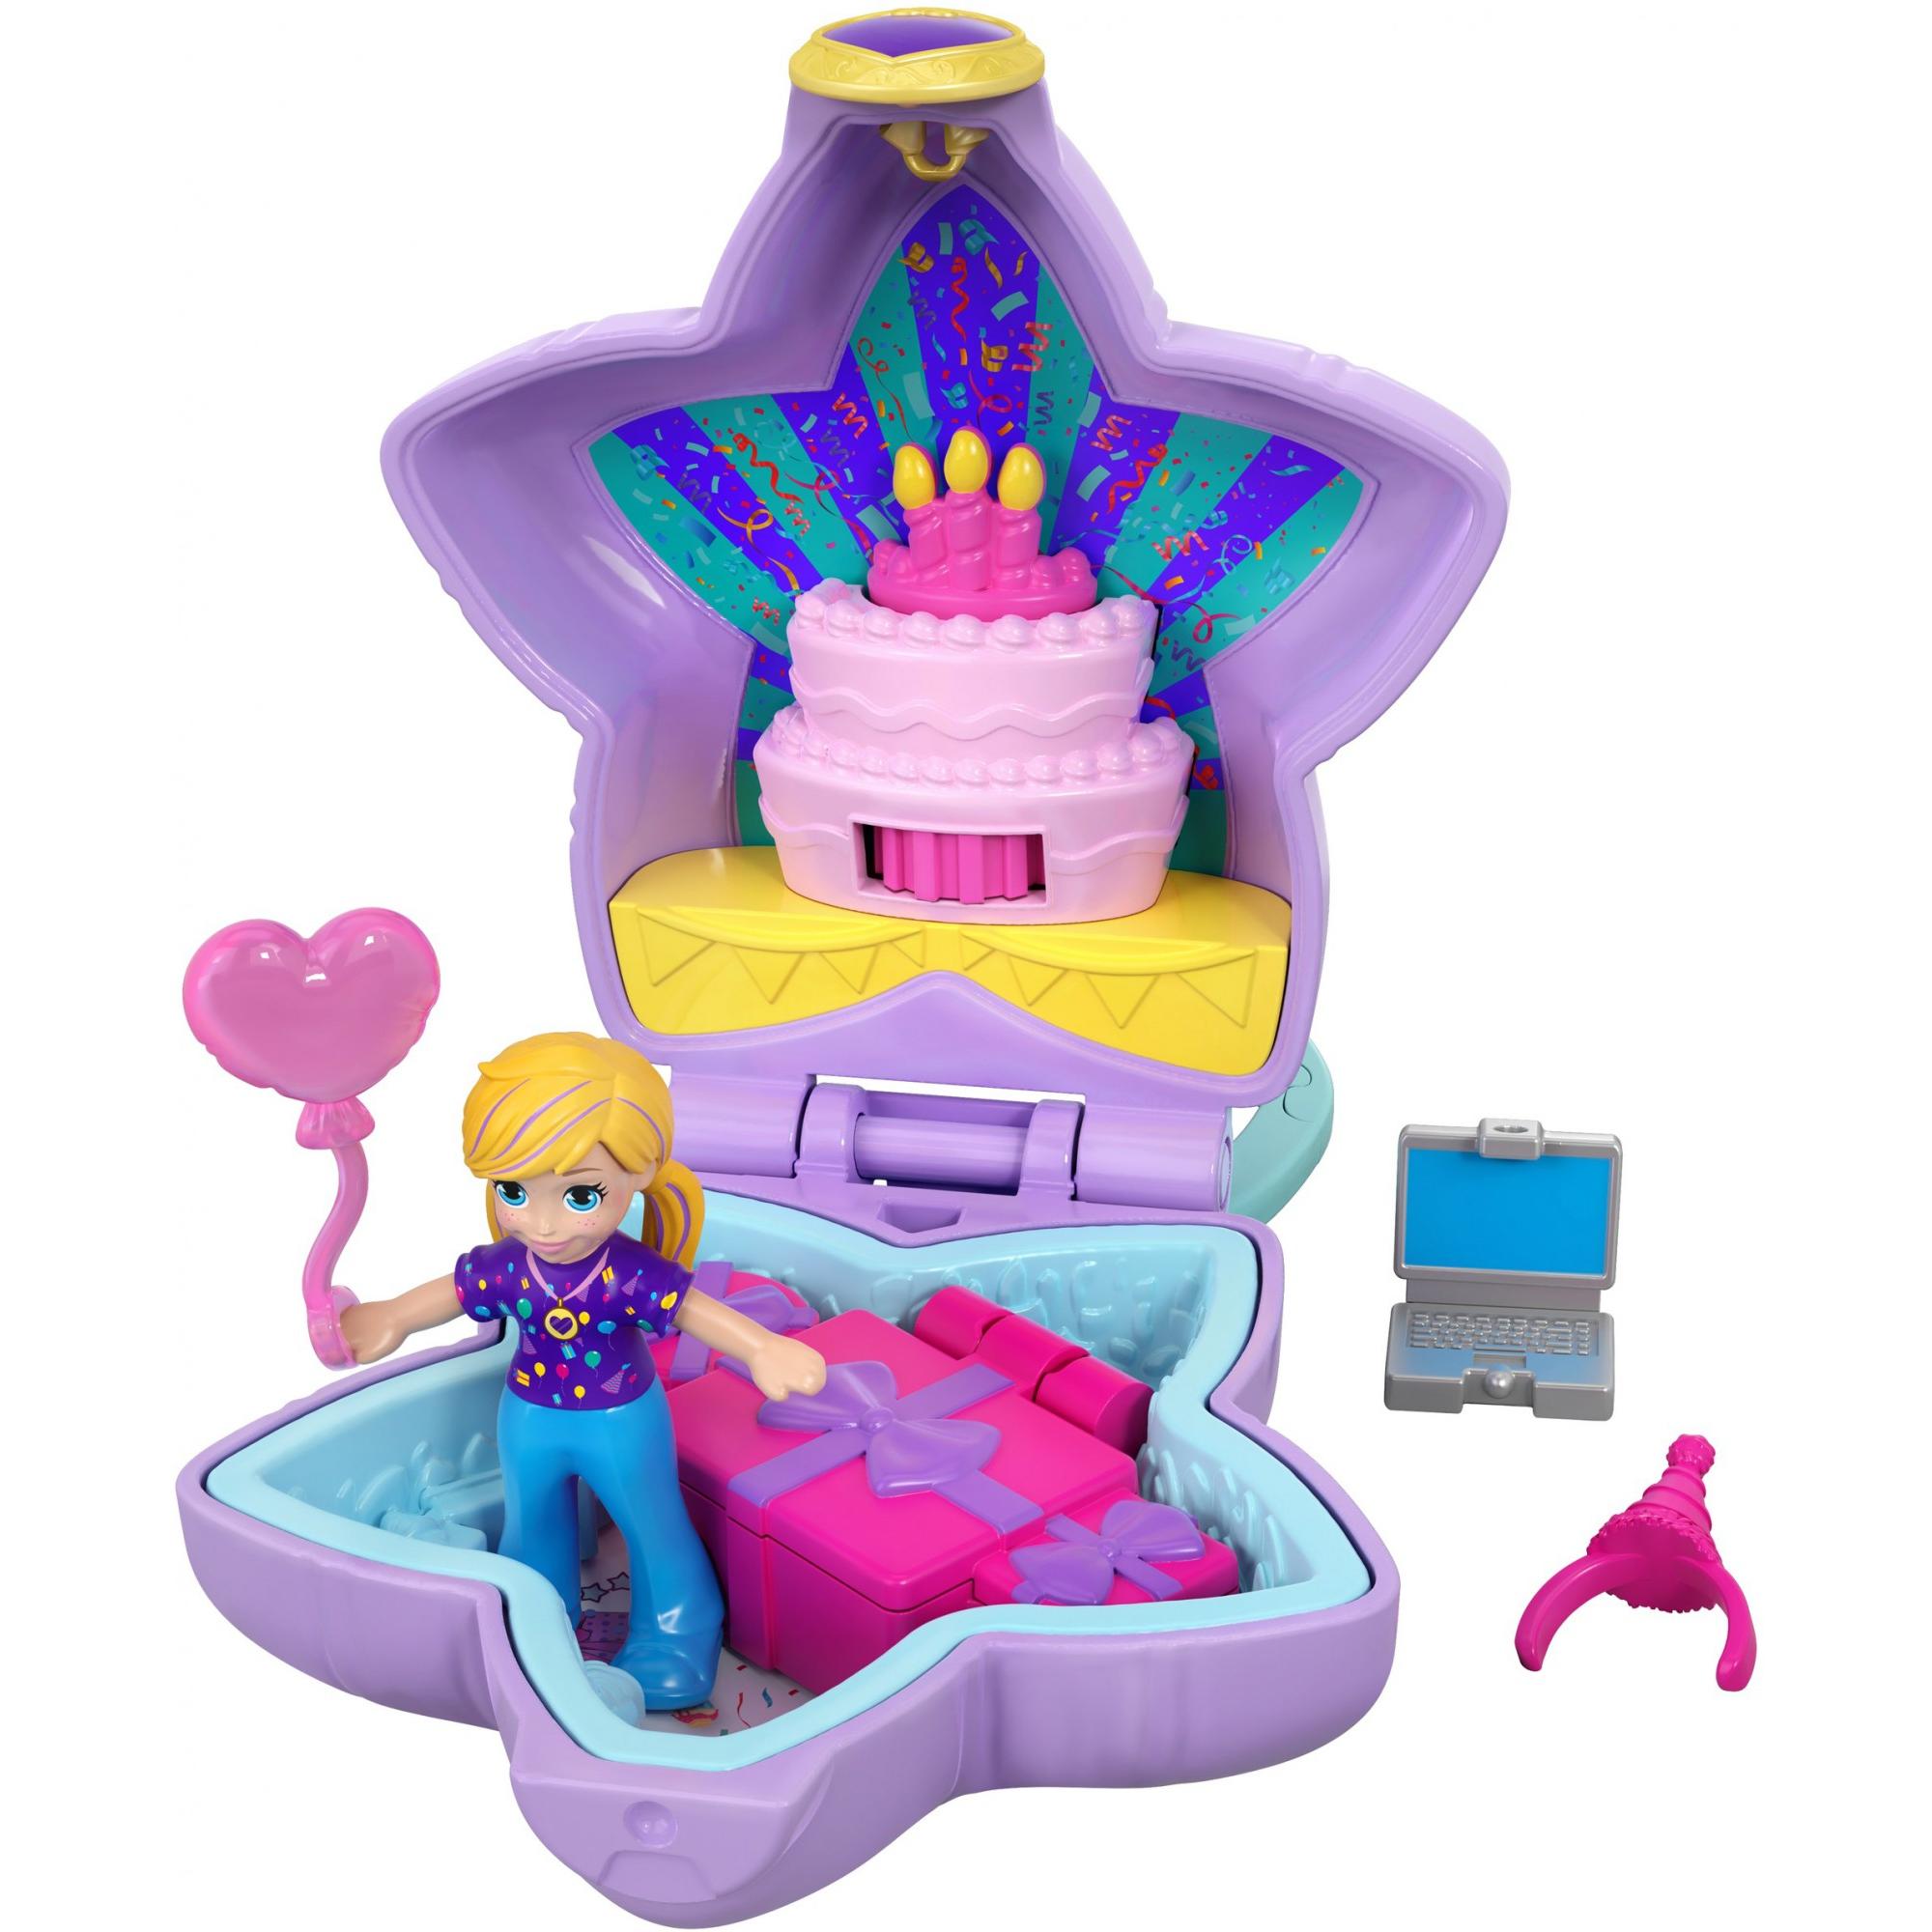 Polly Pocket Tiny Pocket Places Birthday Compact, Doll & Accessories - image 1 of 6